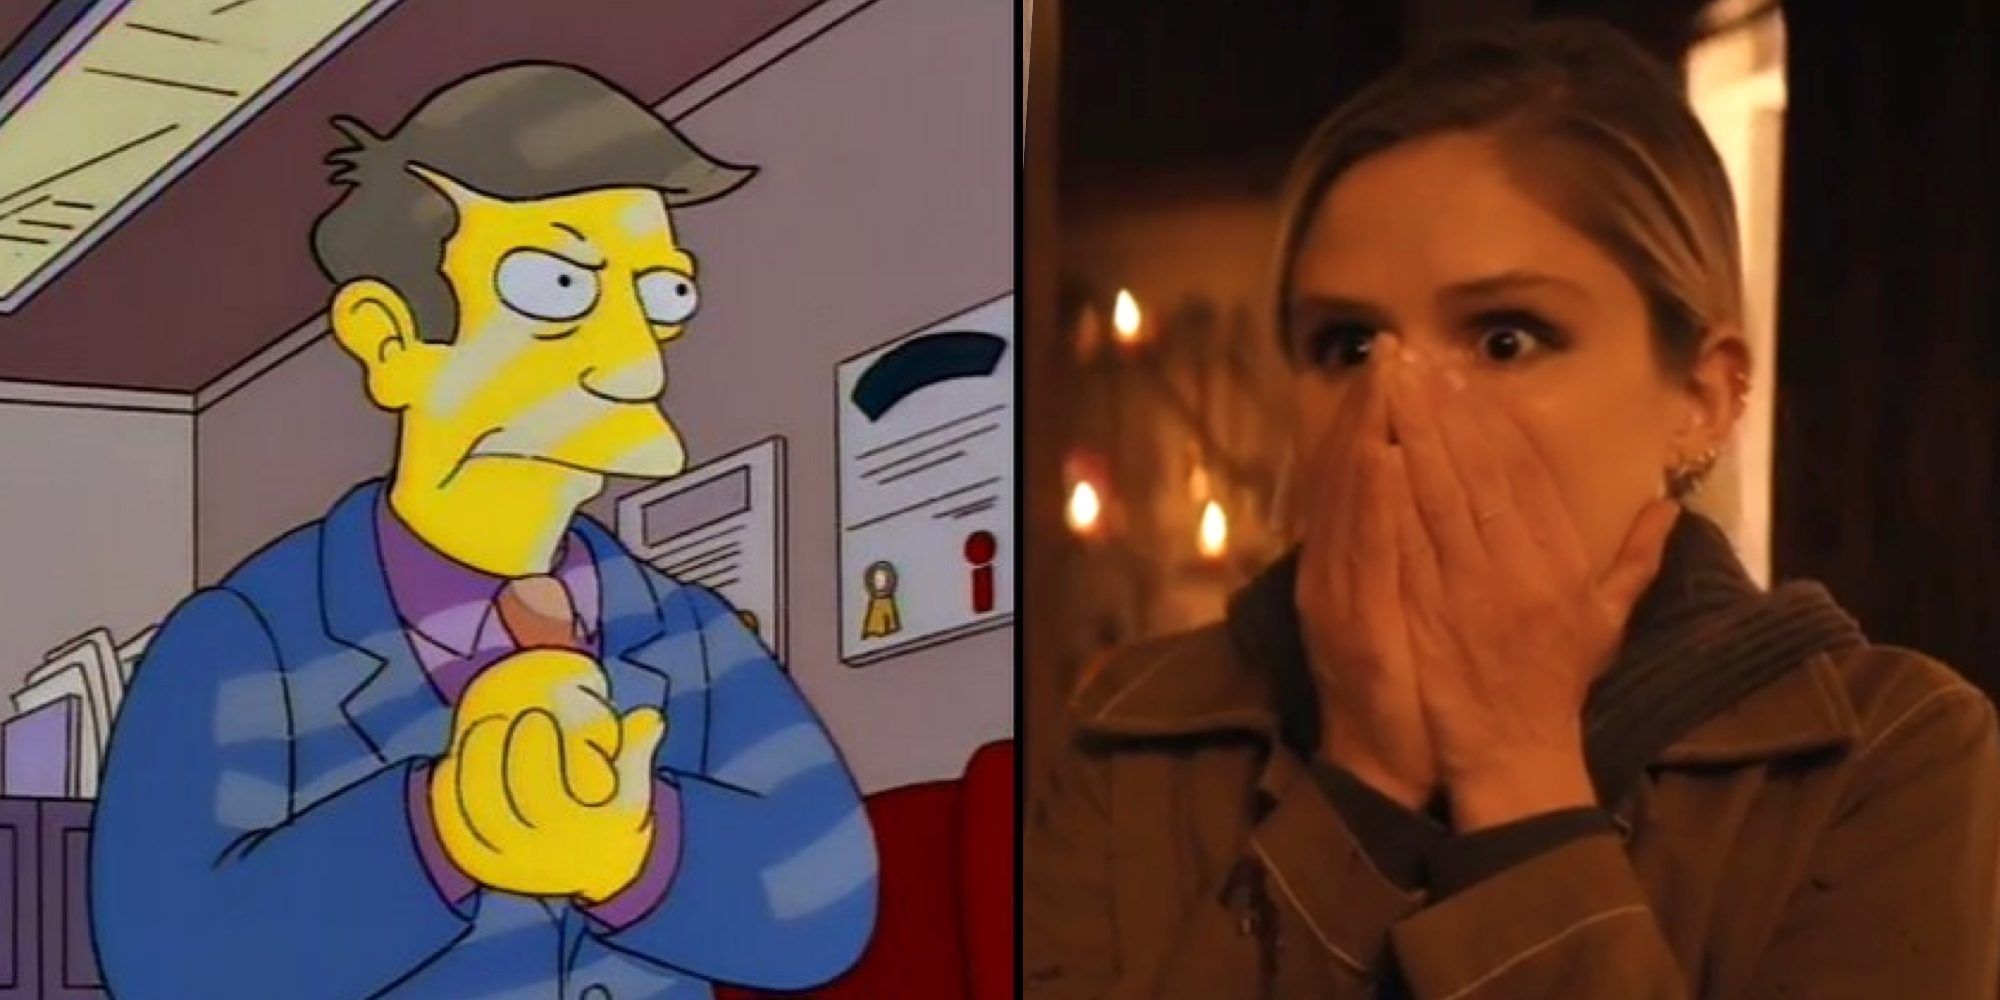 Split image of Principal Skinner from the Simpsons looking scary and Starlight from the Boys looking scared